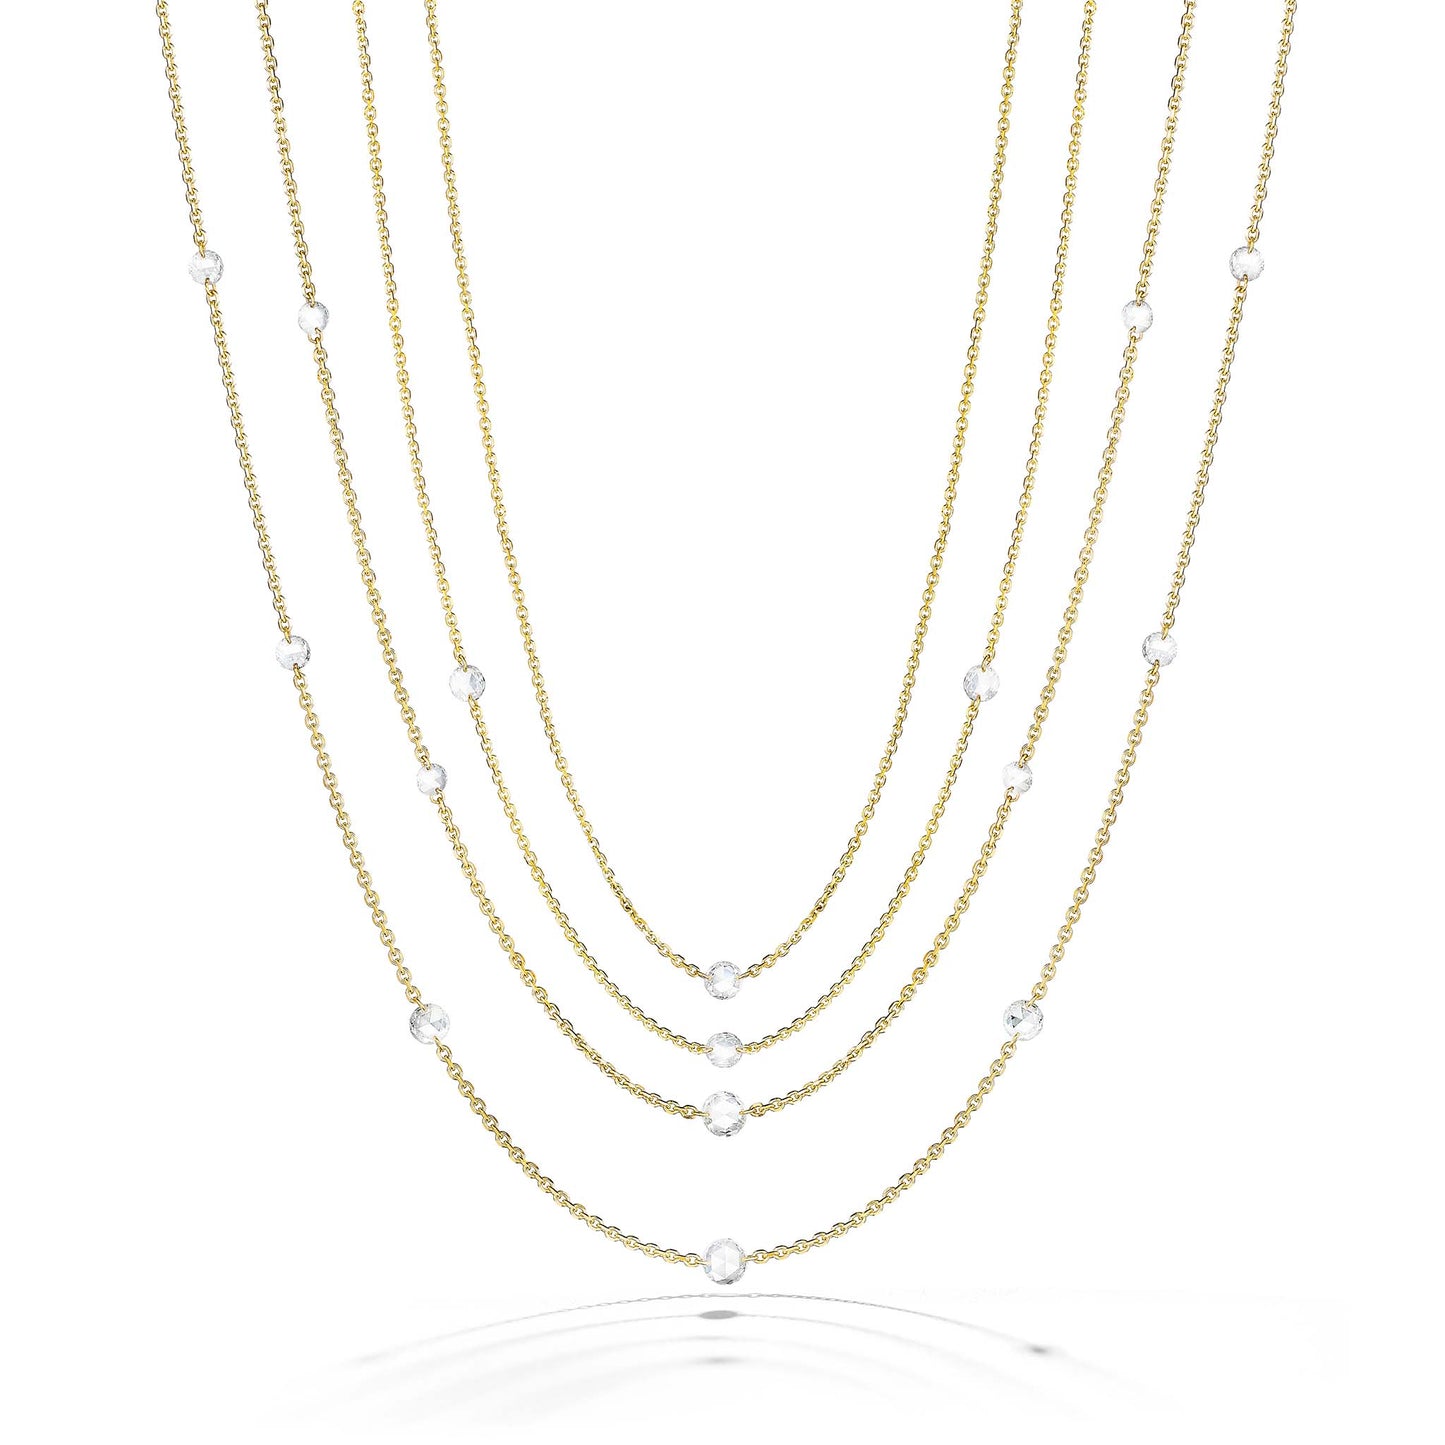 Mimi So Rosette Rose Cut Diamond Necklaces Layered Group